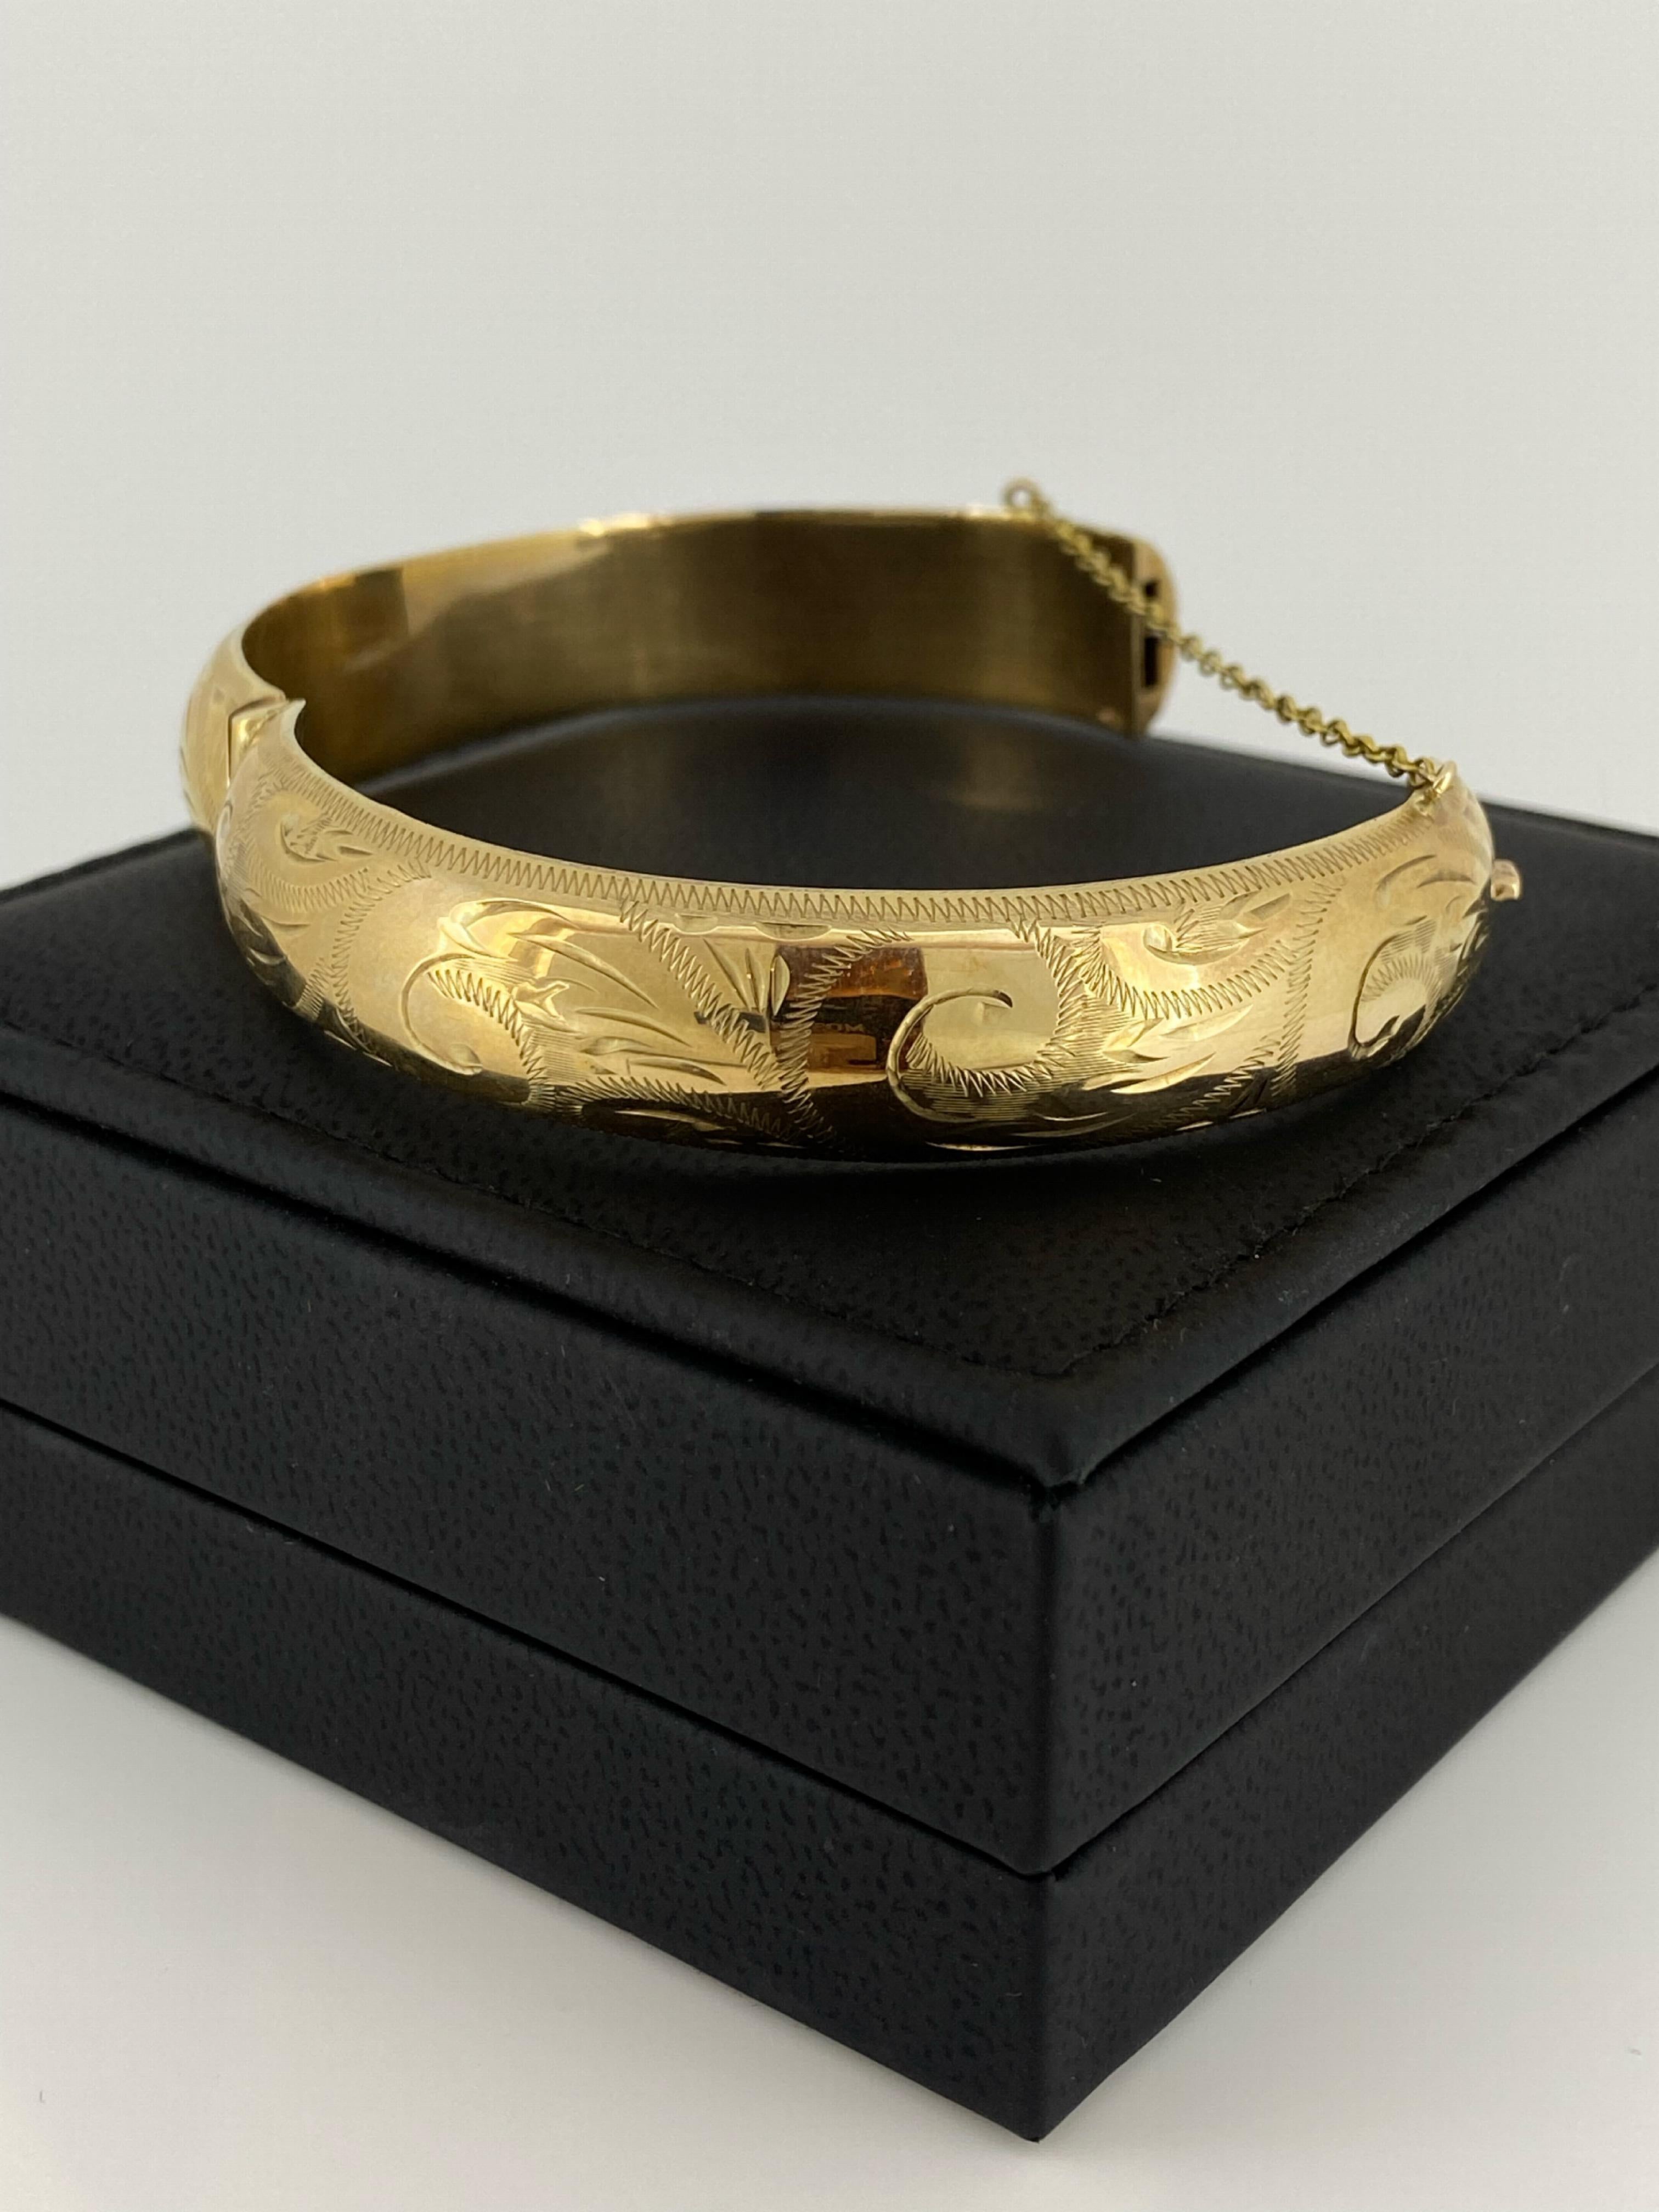 9K Yellow Gold Retro 1950's Finely Engraved Hinged Bangle. Circumference: 21cm. For Sale 1